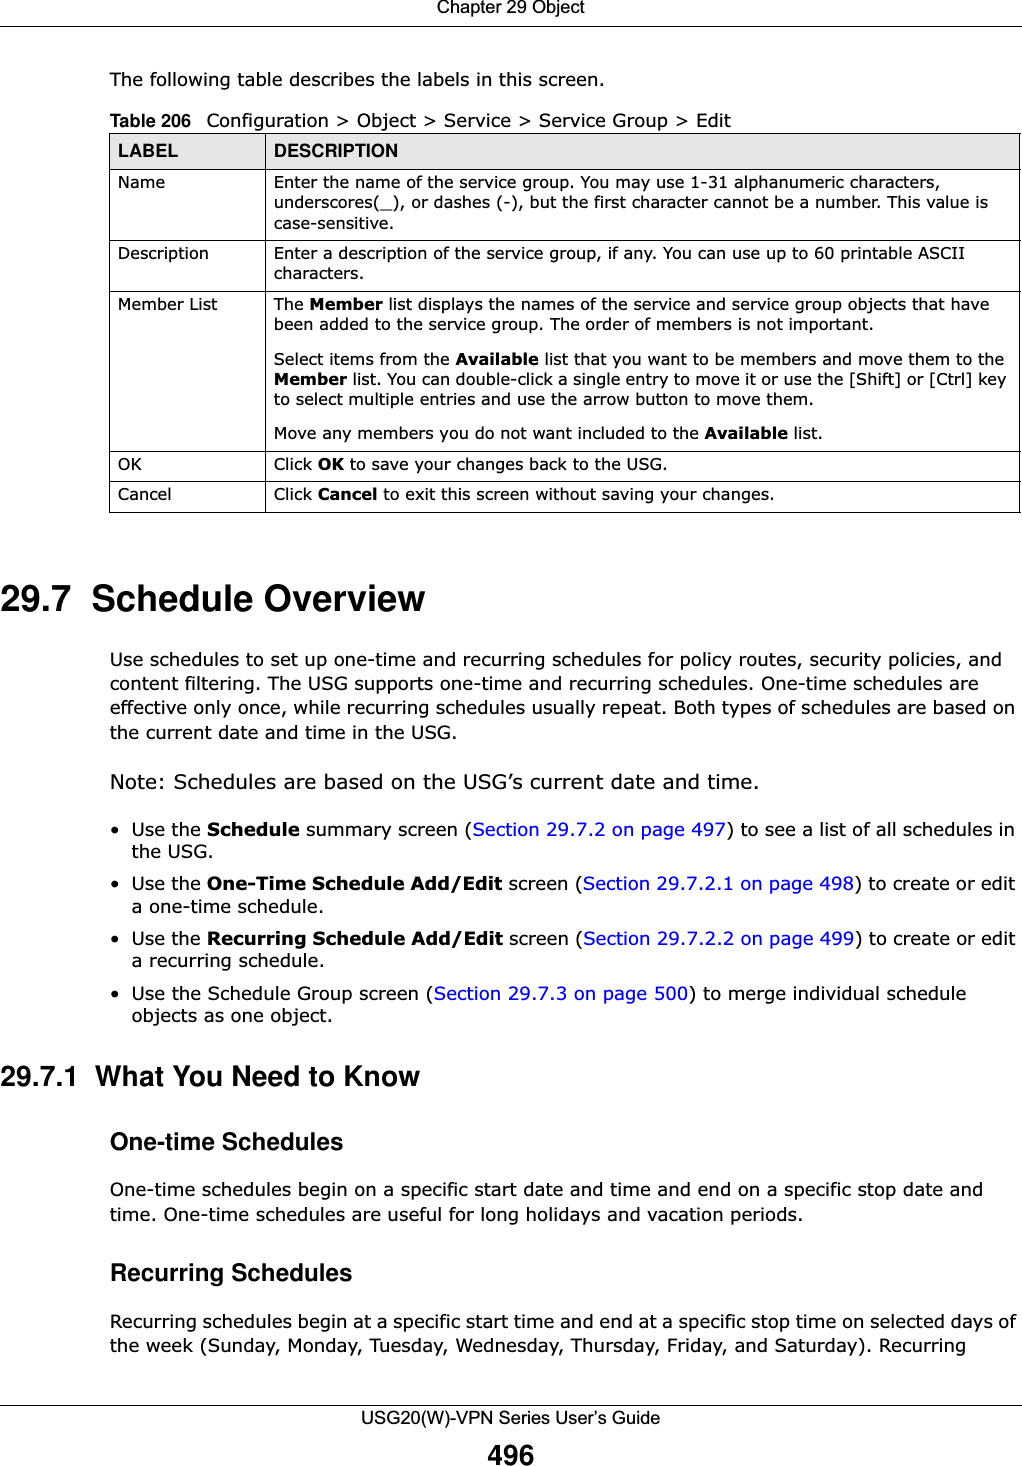 Chapter 29 ObjectUSG20(W)-VPN Series User’s Guide496The following table describes the labels in this screen. 29.7  Schedule Overview Use schedules to set up one-time and recurring schedules for policy routes, security policies, and content filtering. The USG supports one-time and recurring schedules. One-time schedules are effective only once, while recurring schedules usually repeat. Both types of schedules are based on the current date and time in the USG. Note: Schedules are based on the USG’s current date and time.•Use the Schedule summary screen (Section 29.7.2 on page 497) to see a list of all schedules in the USG. •Use the One-Time Schedule Add/Edit screen (Section 29.7.2.1 on page 498) to create or edit a one-time schedule.•Use the Recurring Schedule Add/Edit screen (Section 29.7.2.2 on page 499) to create or edit a recurring schedule.• Use the Schedule Group screen (Section 29.7.3 on page 500) to merge individual schedule objects as one object.29.7.1  What You Need to KnowOne-time SchedulesOne-time schedules begin on a specific start date and time and end on a specific stop date and time. One-time schedules are useful for long holidays and vacation periods.Recurring SchedulesRecurring schedules begin at a specific start time and end at a specific stop time on selected days of the week (Sunday, Monday, Tuesday, Wednesday, Thursday, Friday, and Saturday). Recurring Table 206   Configuration &gt; Object &gt; Service &gt; Service Group &gt; EditLABEL DESCRIPTIONName Enter the name of the service group. You may use 1-31 alphanumeric characters, underscores(_), or dashes (-), but the first character cannot be a number. This value is case-sensitive.Description Enter a description of the service group, if any. You can use up to 60 printable ASCII characters.Member List The Member list displays the names of the service and service group objects that have been added to the service group. The order of members is not important. Select items from the Available list that you want to be members and move them to the Member list. You can double-click a single entry to move it or use the [Shift] or [Ctrl] key to select multiple entries and use the arrow button to move them. Move any members you do not want included to the Available list. OK Click OK to save your changes back to the USG.Cancel Click Cancel to exit this screen without saving your changes.